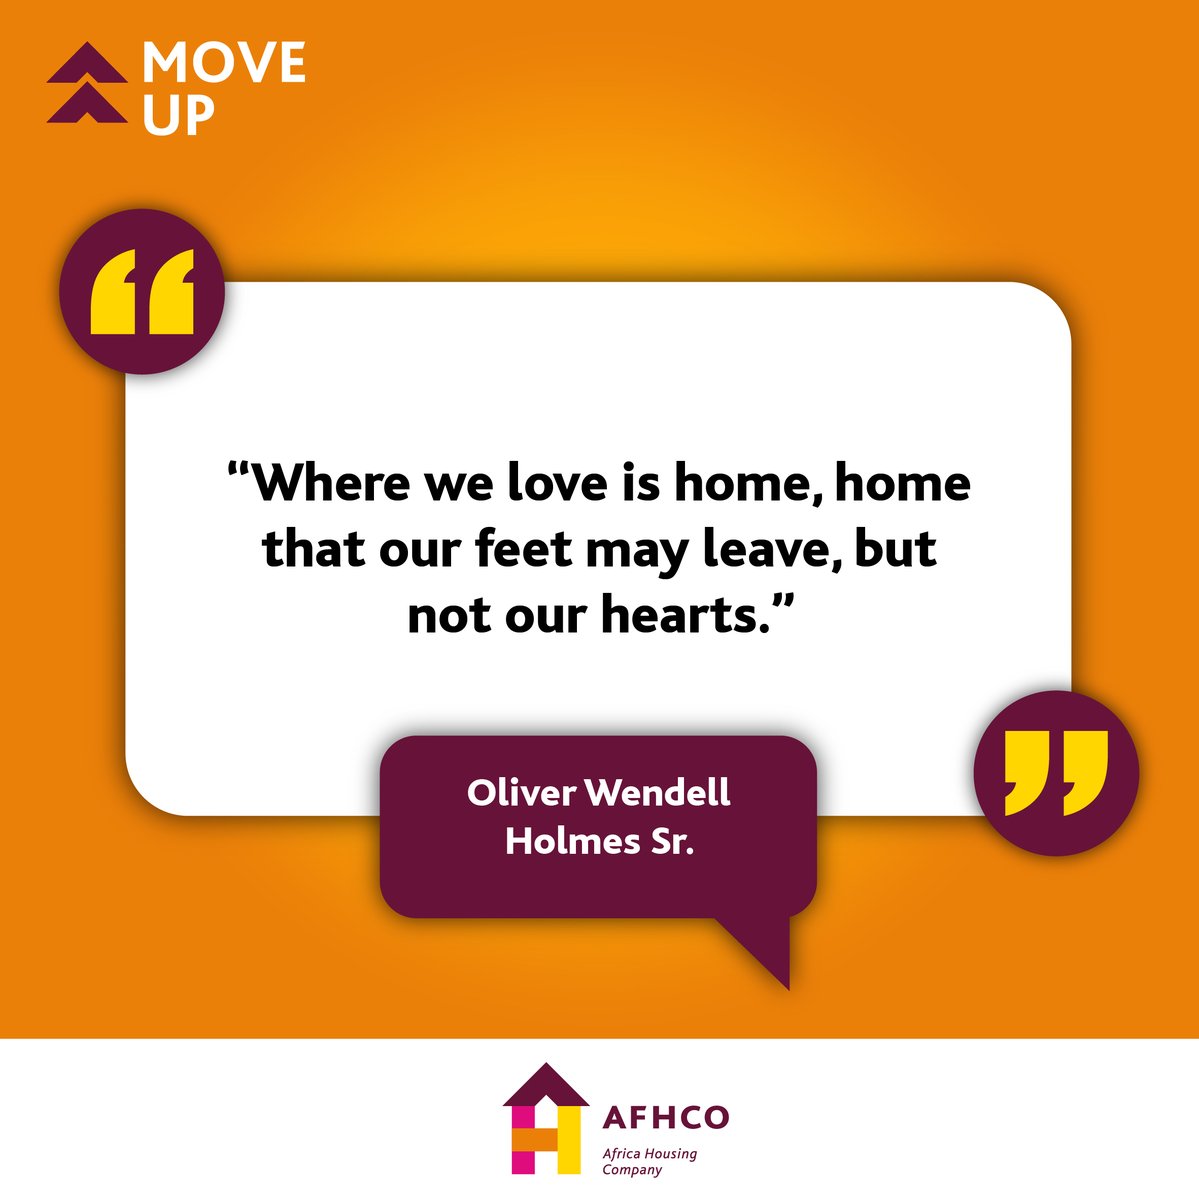 Focus on creating positive memories and experiences together with your loved ones because a happy home is one where everyone feels valued, respected, and able to be themselves. #MoveUp #StaywithAFHCO #apartmentstolet #MoveUpwithAFHCO #AFHCO #property #propertymanagement #rent